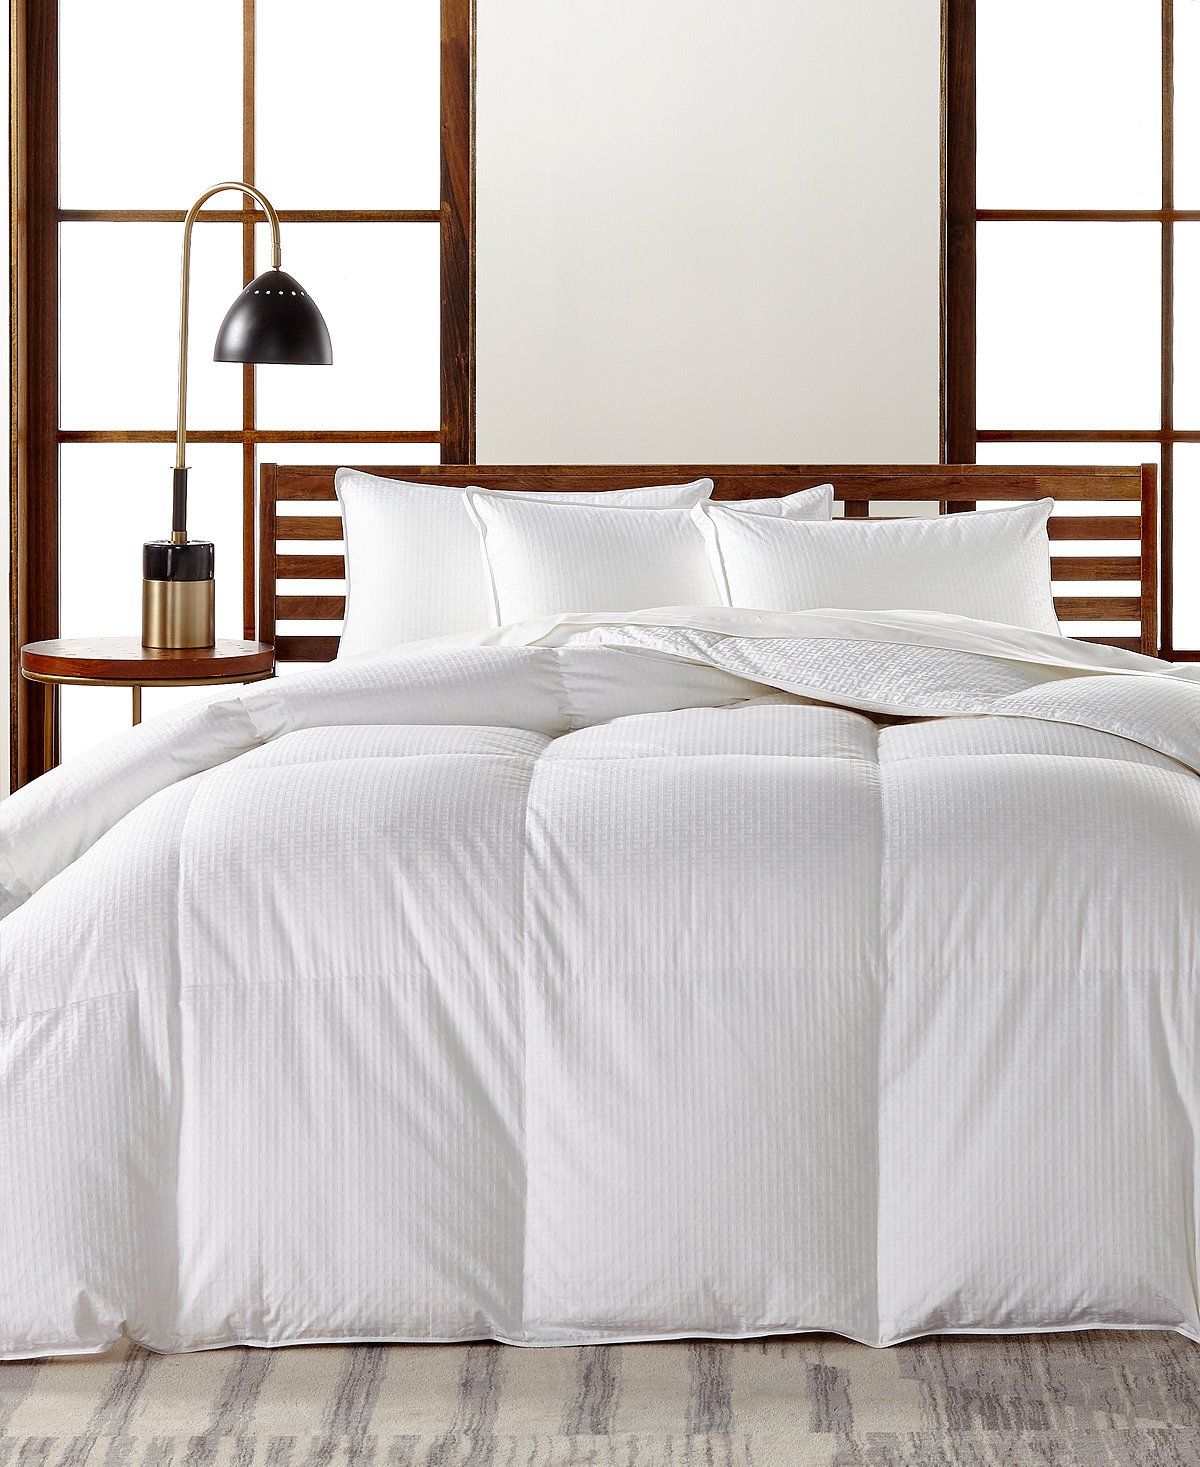 Hotel collection European White goose Down Medium Weight King comforter, Hypoallergenic Ultraclean Down